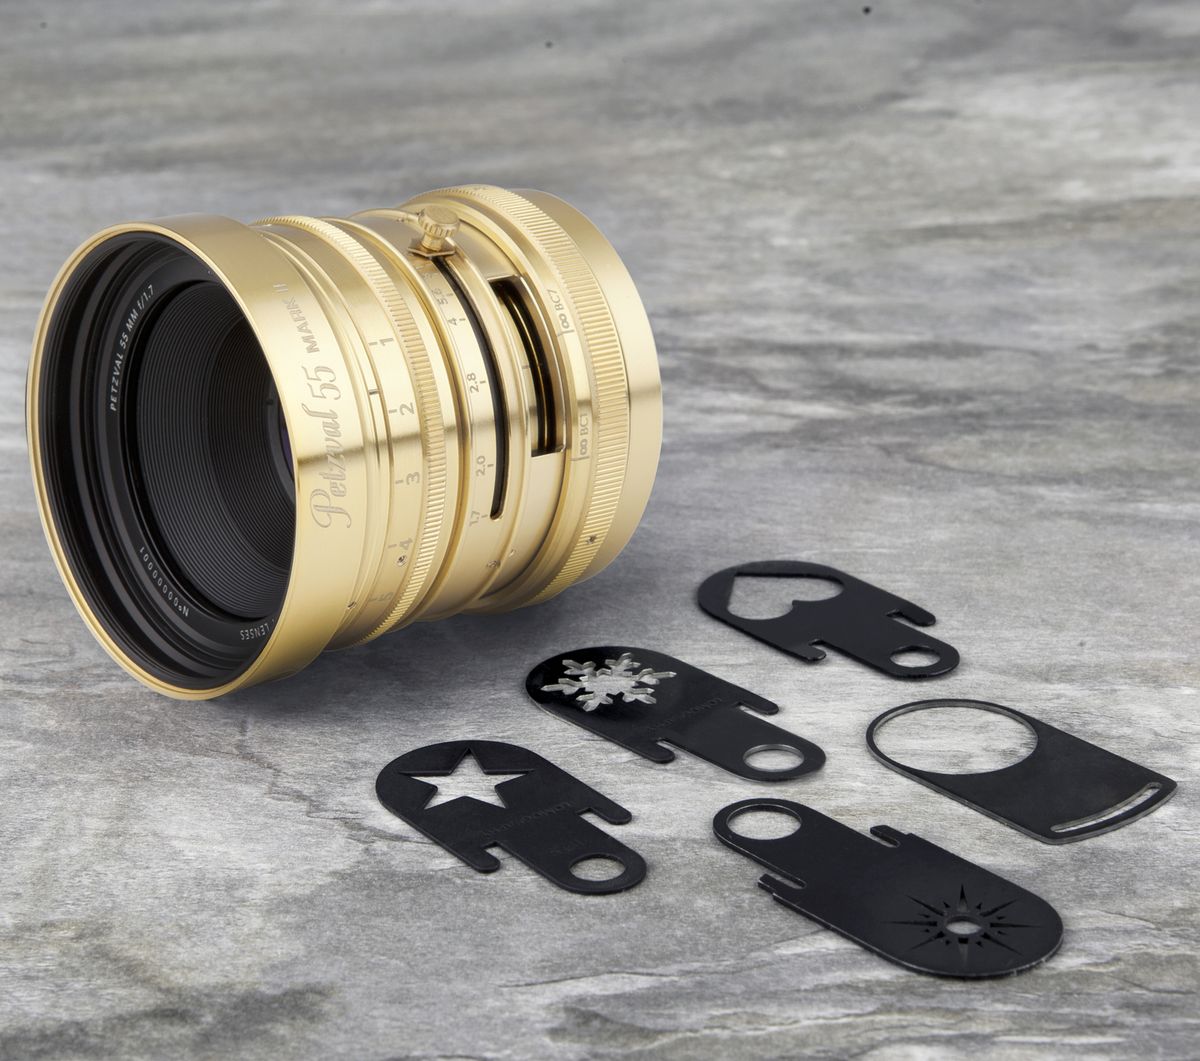 [OFFICIAL PH] LOMOGRAPHY NEW Petzval 55mm f1.7 MKII Sony ...